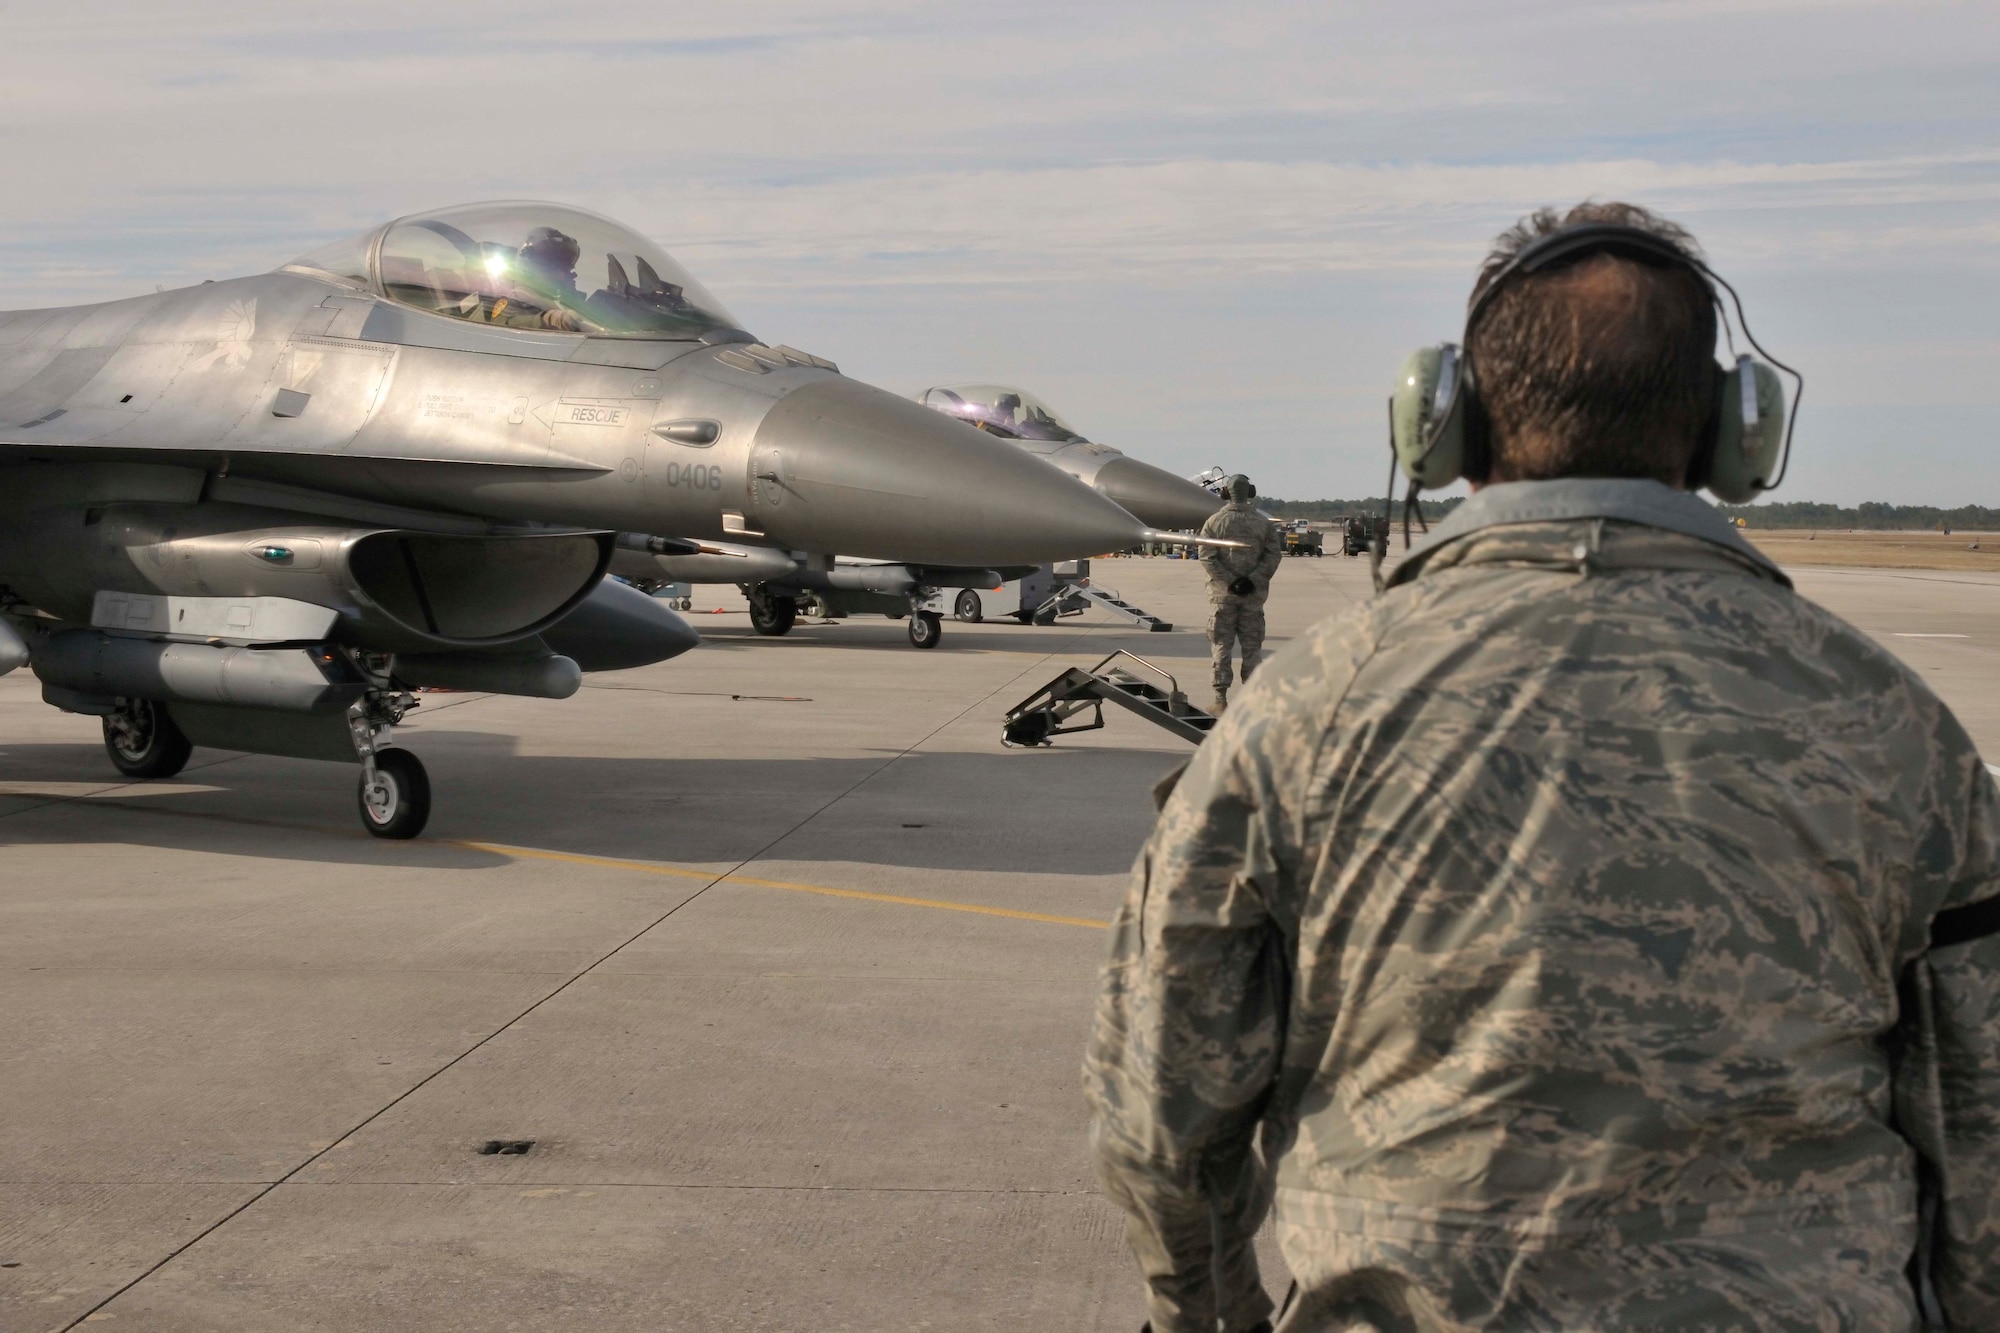 Maintainers from the 179th Fighter Squadron, a subordinate unit of the 148th Fighter Wing out of Duluth, Minn., prepare to launch F-16s for a mission at Tyndall Air Force Base, Fla., Jan. 27. The 148th FW is working with the 53rd Weapons Evaluation Group at Tyndall AFB for two weeks to train for their Air Sovereignty Alert missions and to validate their new Block 50 F-16s. (U.S. Air Force photo by Tech. Sgt. John Hoffmann)